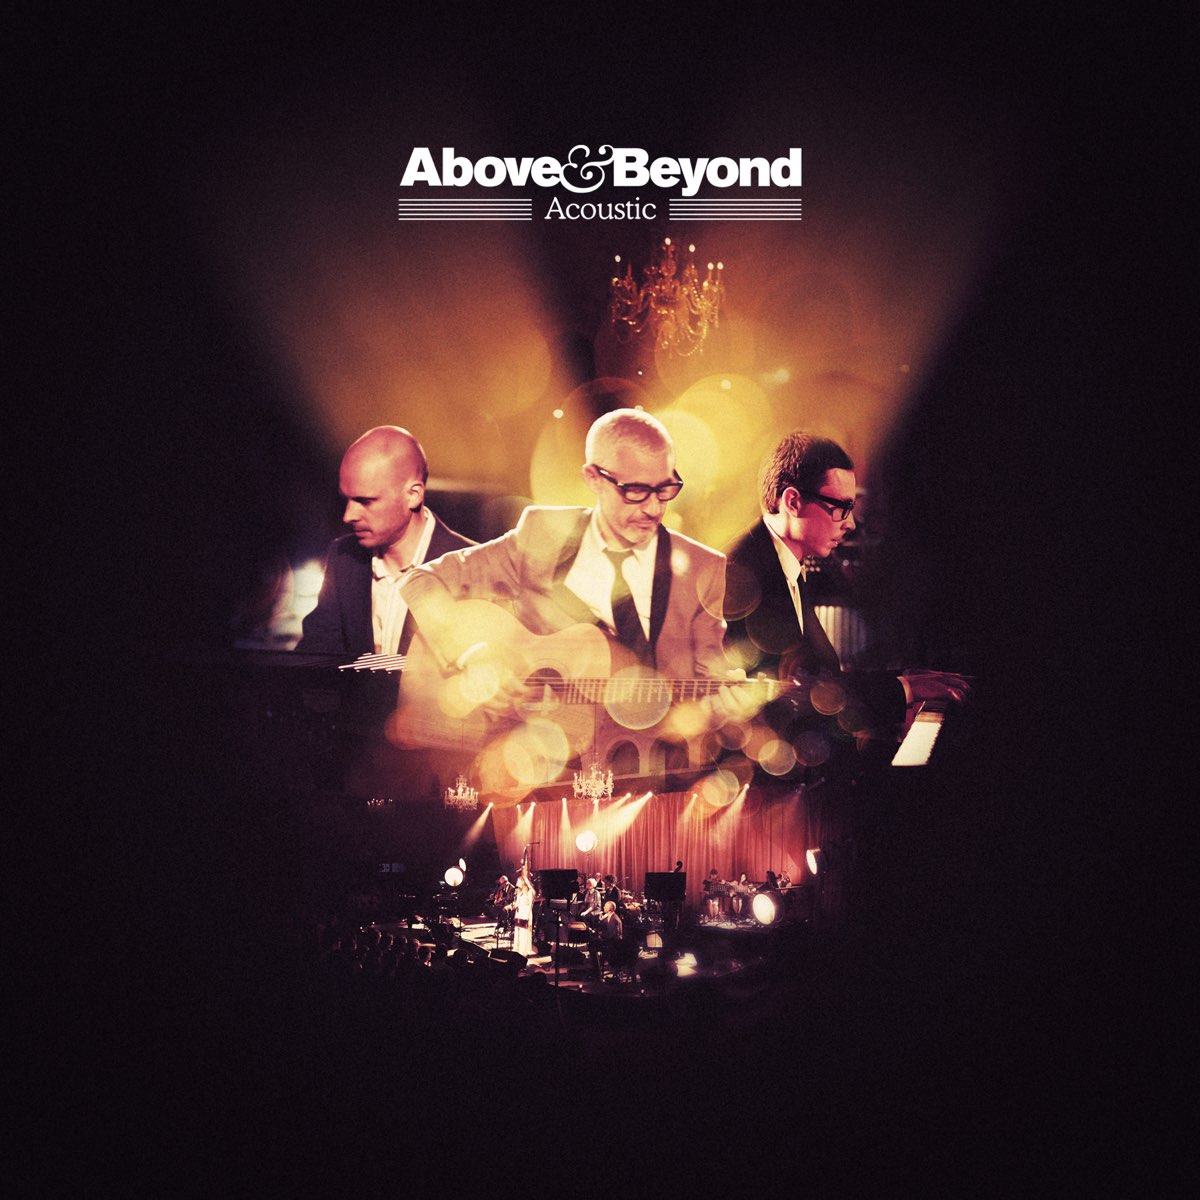 ‎Acoustic - Album by Above & Beyond - Apple Music